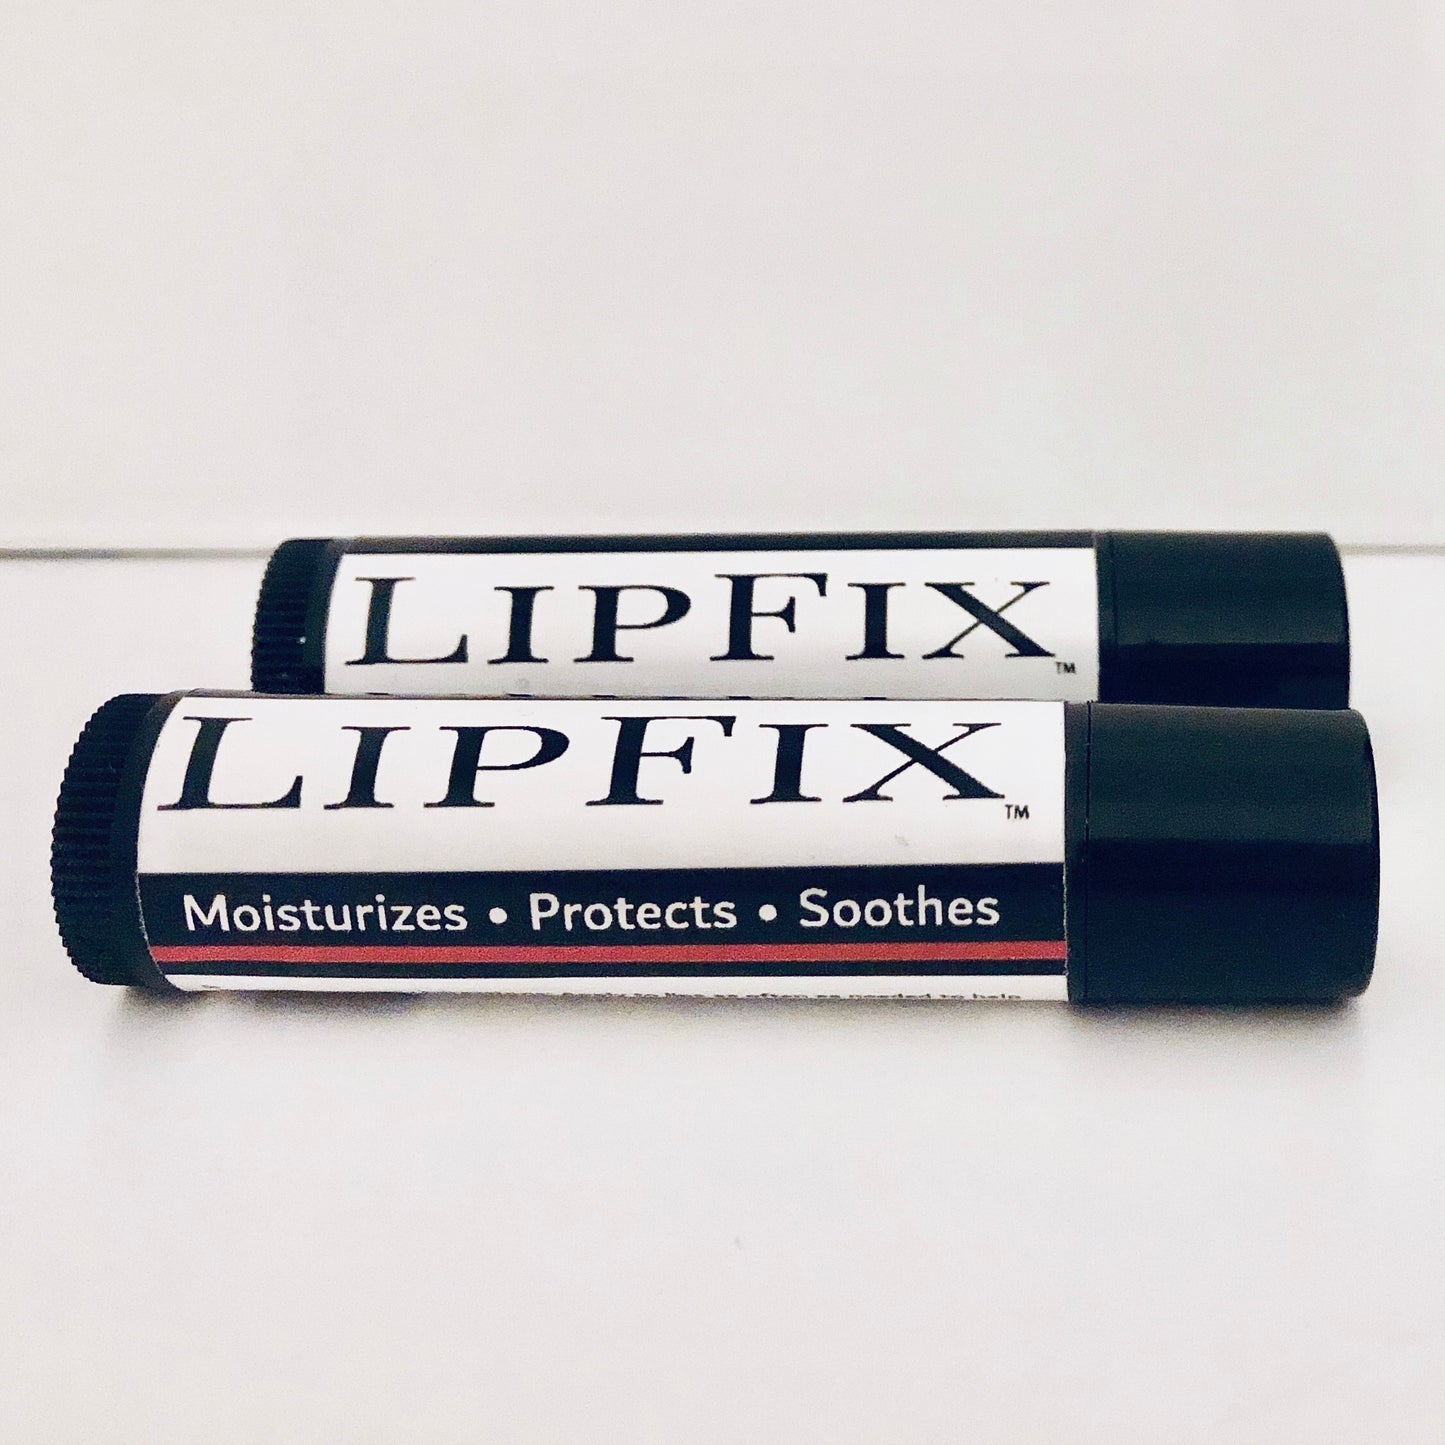 How To Heal Calluses, Blisters, and Skin Rips - RipFix  - LipFix Balm (Single)